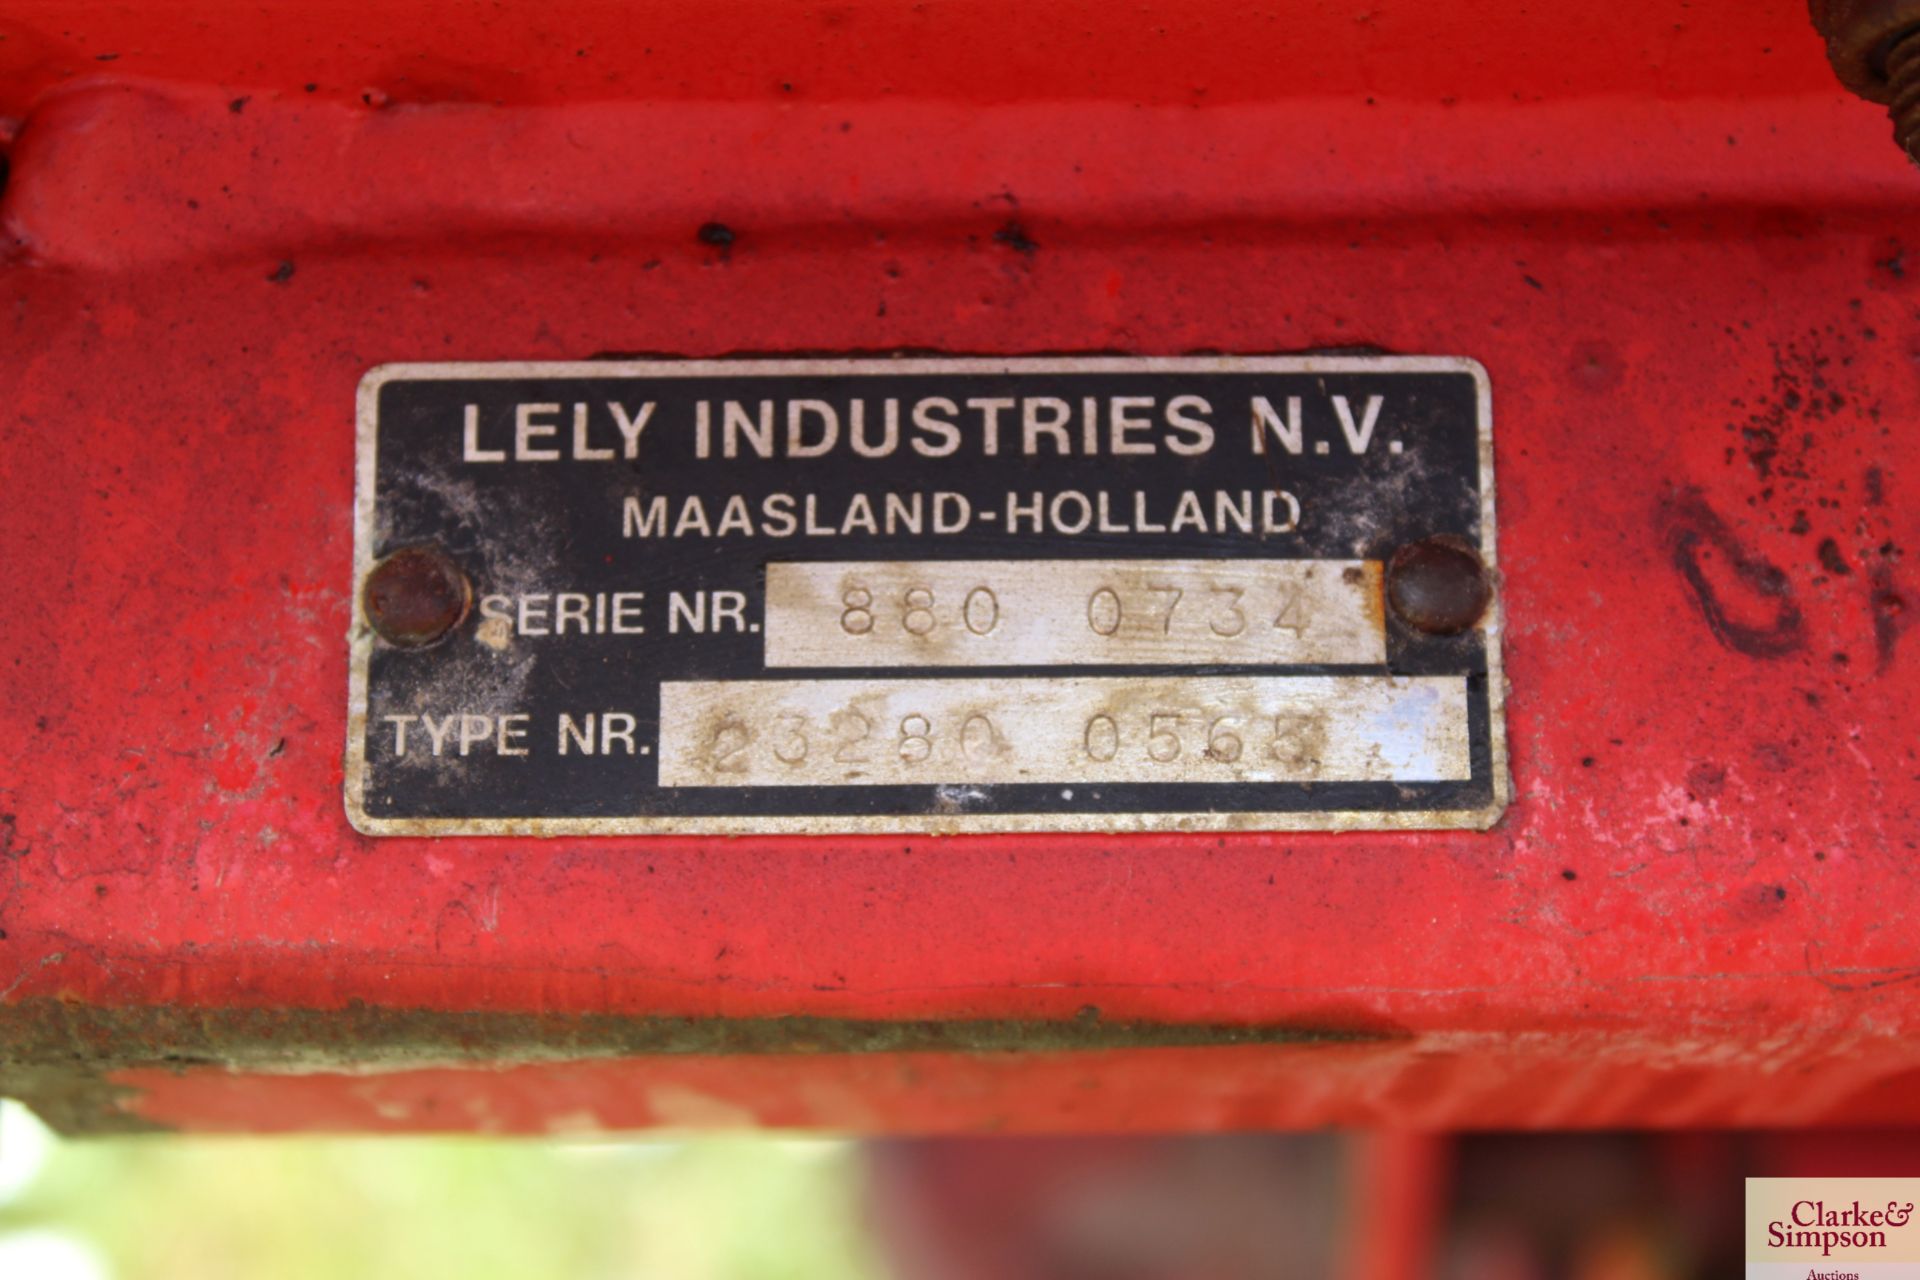 Lely 12m twin disc fertiliser spreader. Serial number 880 0734. Type 23280 0565. Will spread 20m. - Image 7 of 7